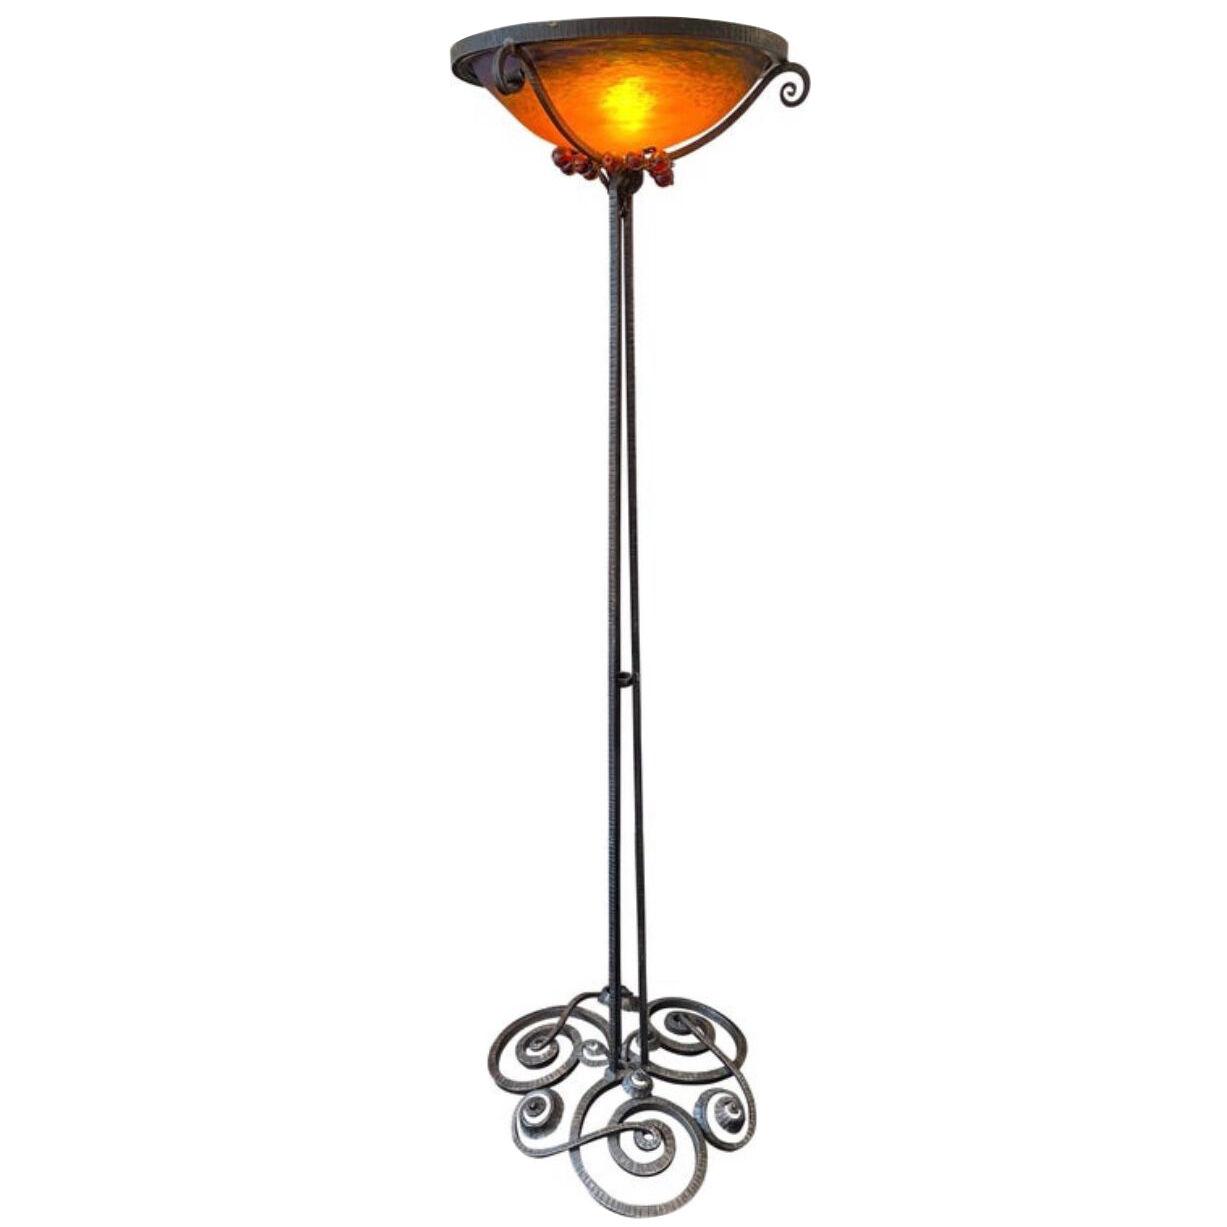 Art Nouveau Jules Cayette and Charles Schneider Wrought Iron Floor Lamp